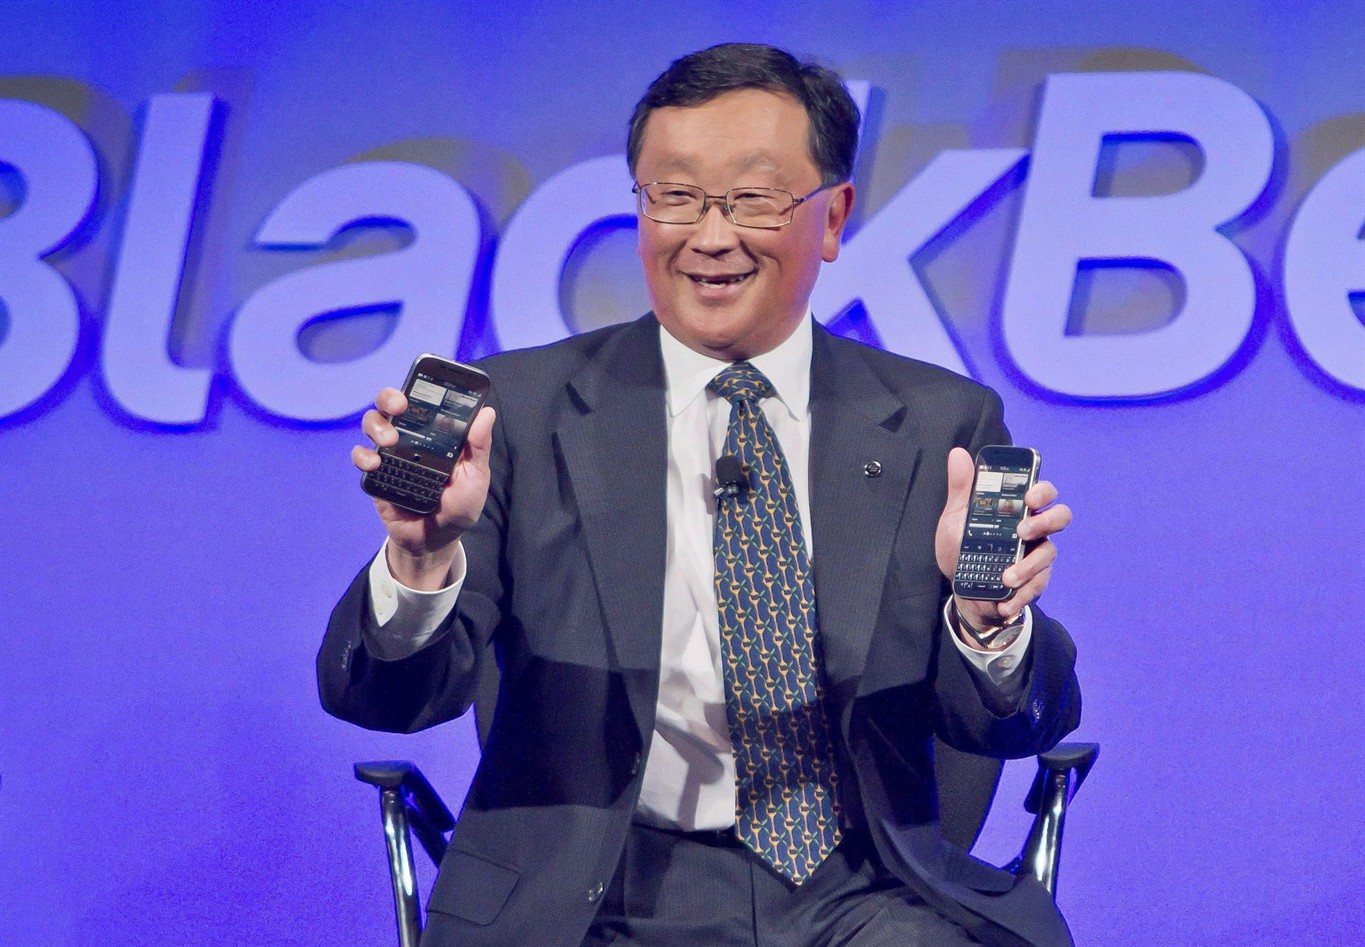 BlackBerry CEO John Chen sees Detroit auto show as next stop on road to